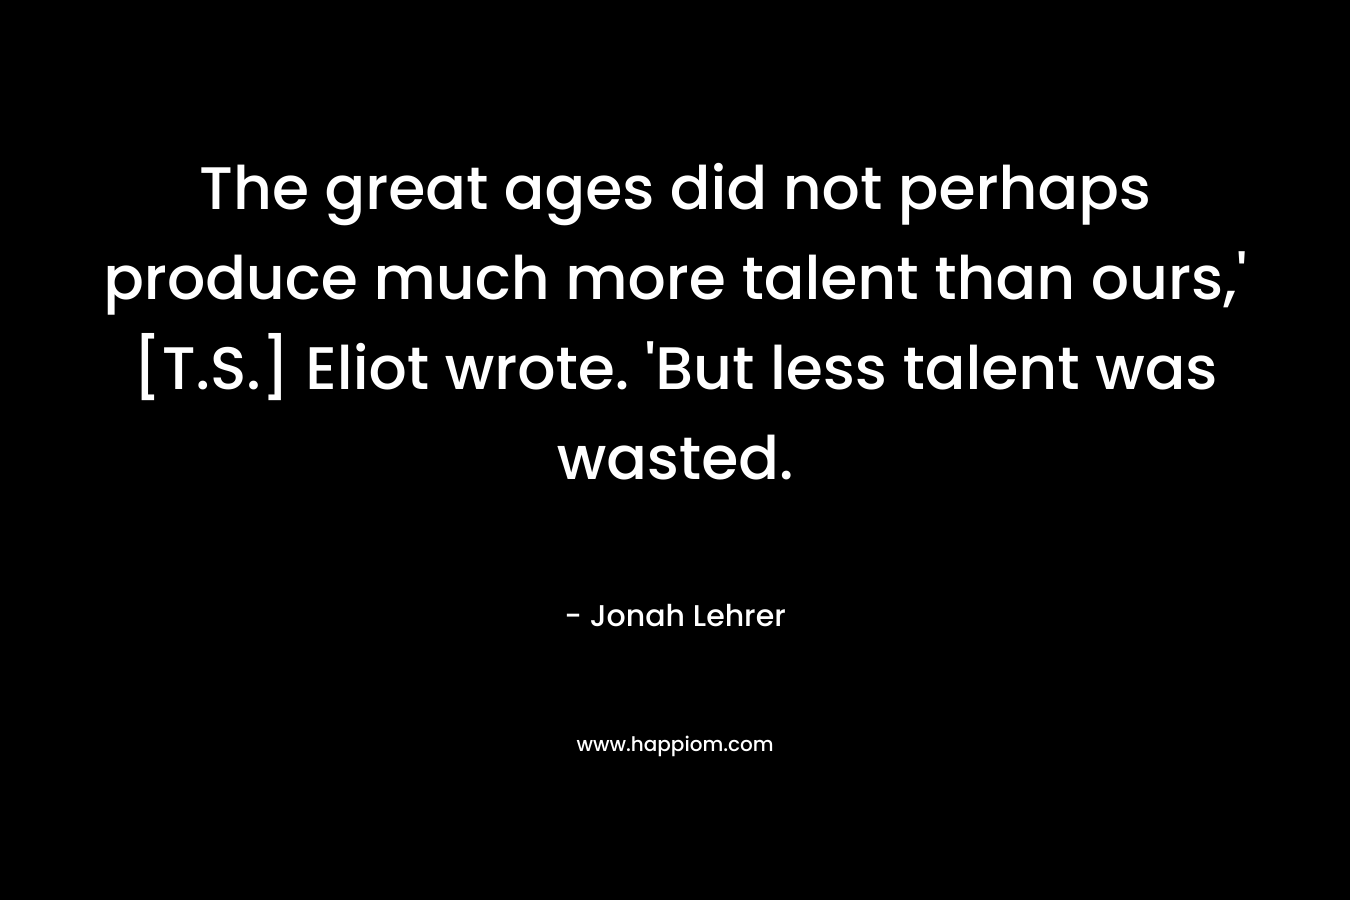 The great ages did not perhaps produce much more talent than ours,’ [T.S.] Eliot wrote. ‘But less talent was wasted. – Jonah Lehrer